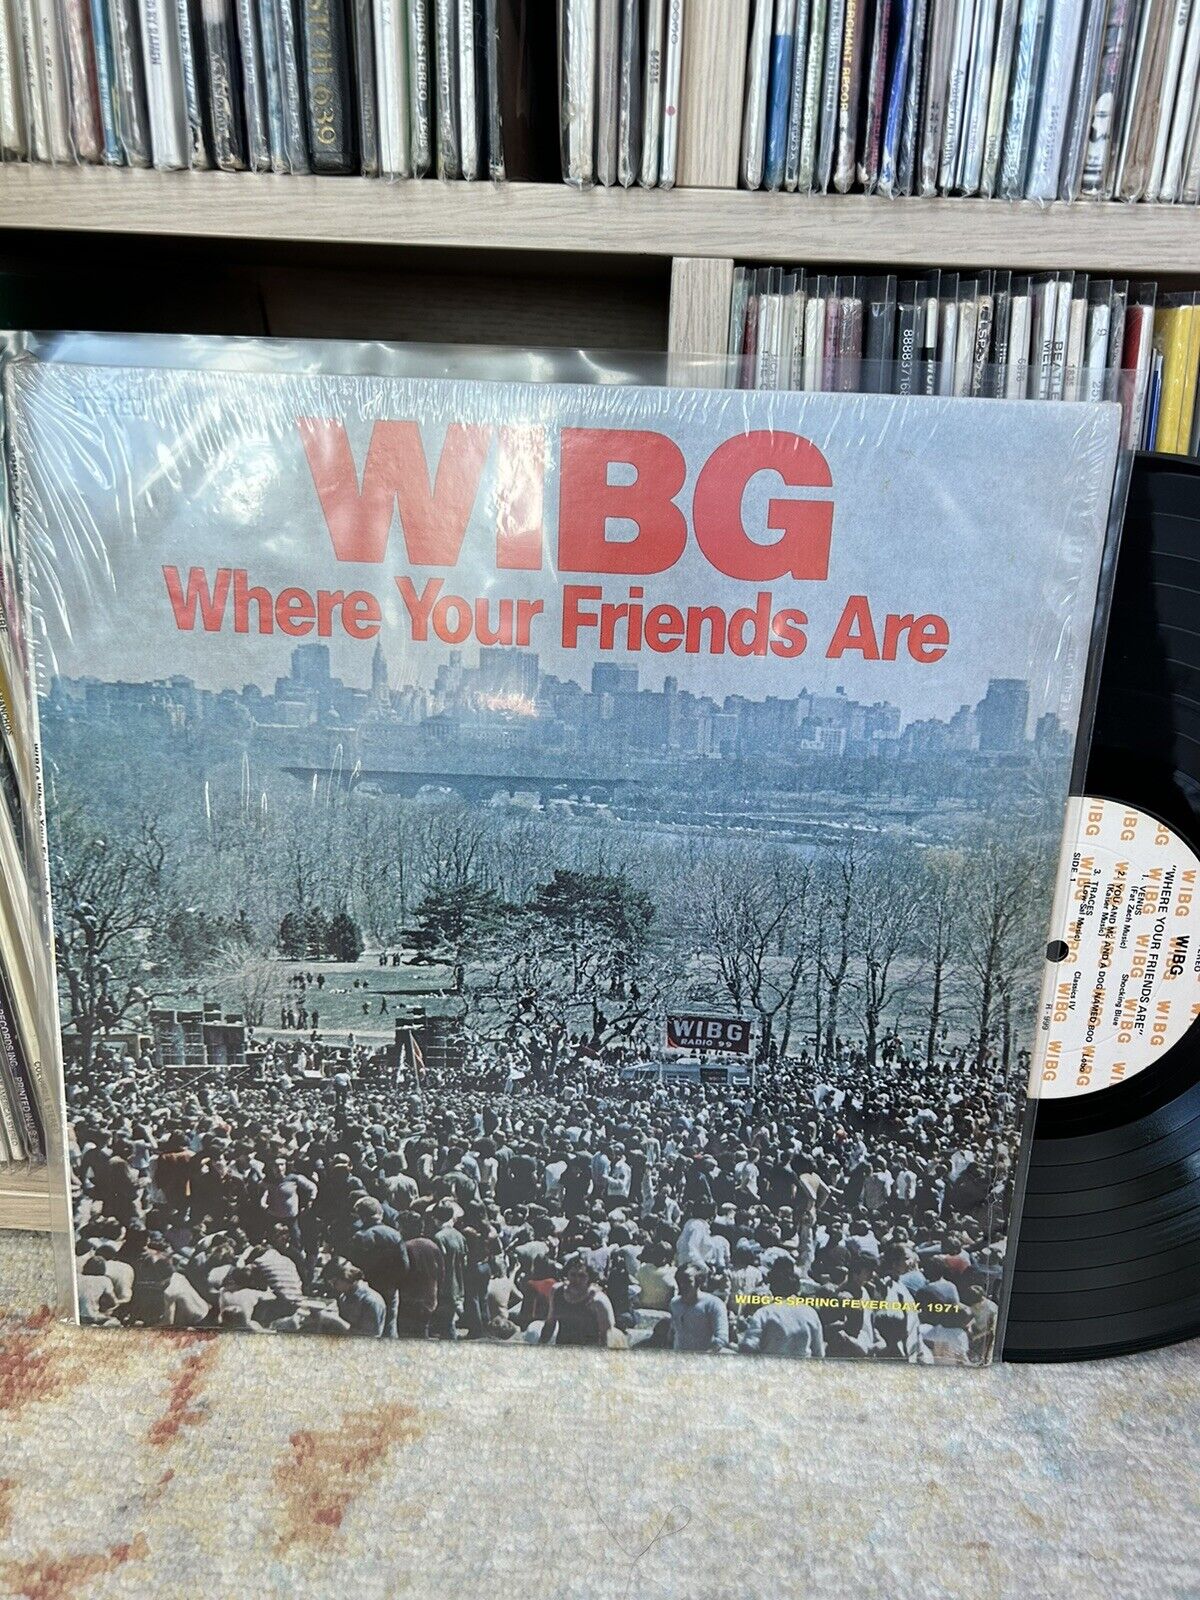 WIBG Where Your Friends Are. Pre Owned Vinyl LP. RONDA-999 Stereo. Excellent